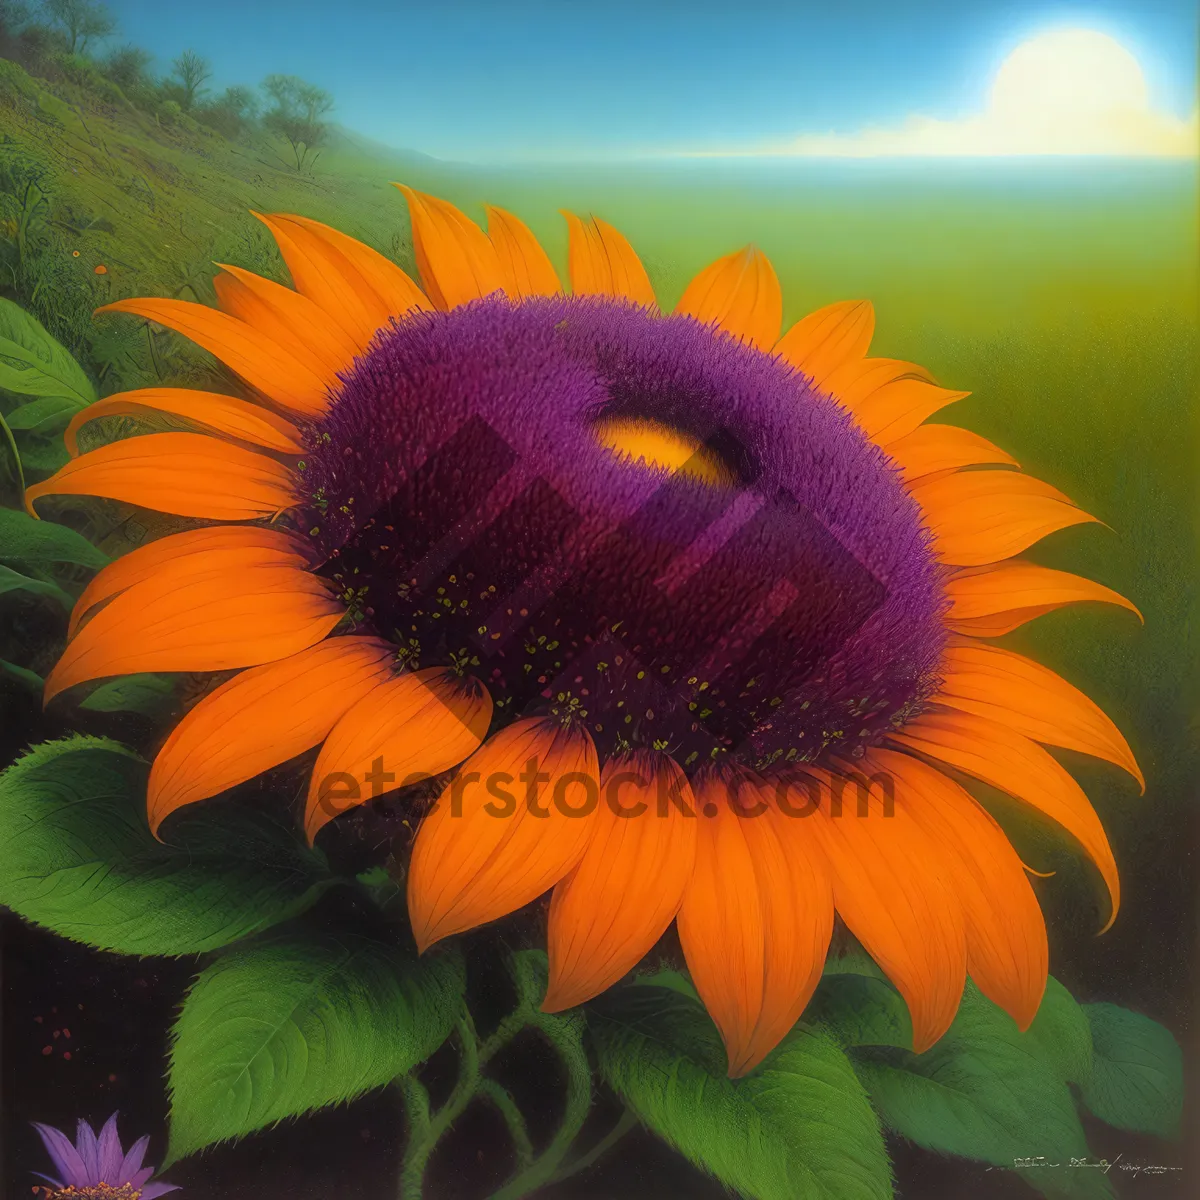 Picture of Vibrant Sunflower Blooming in Sunny Field